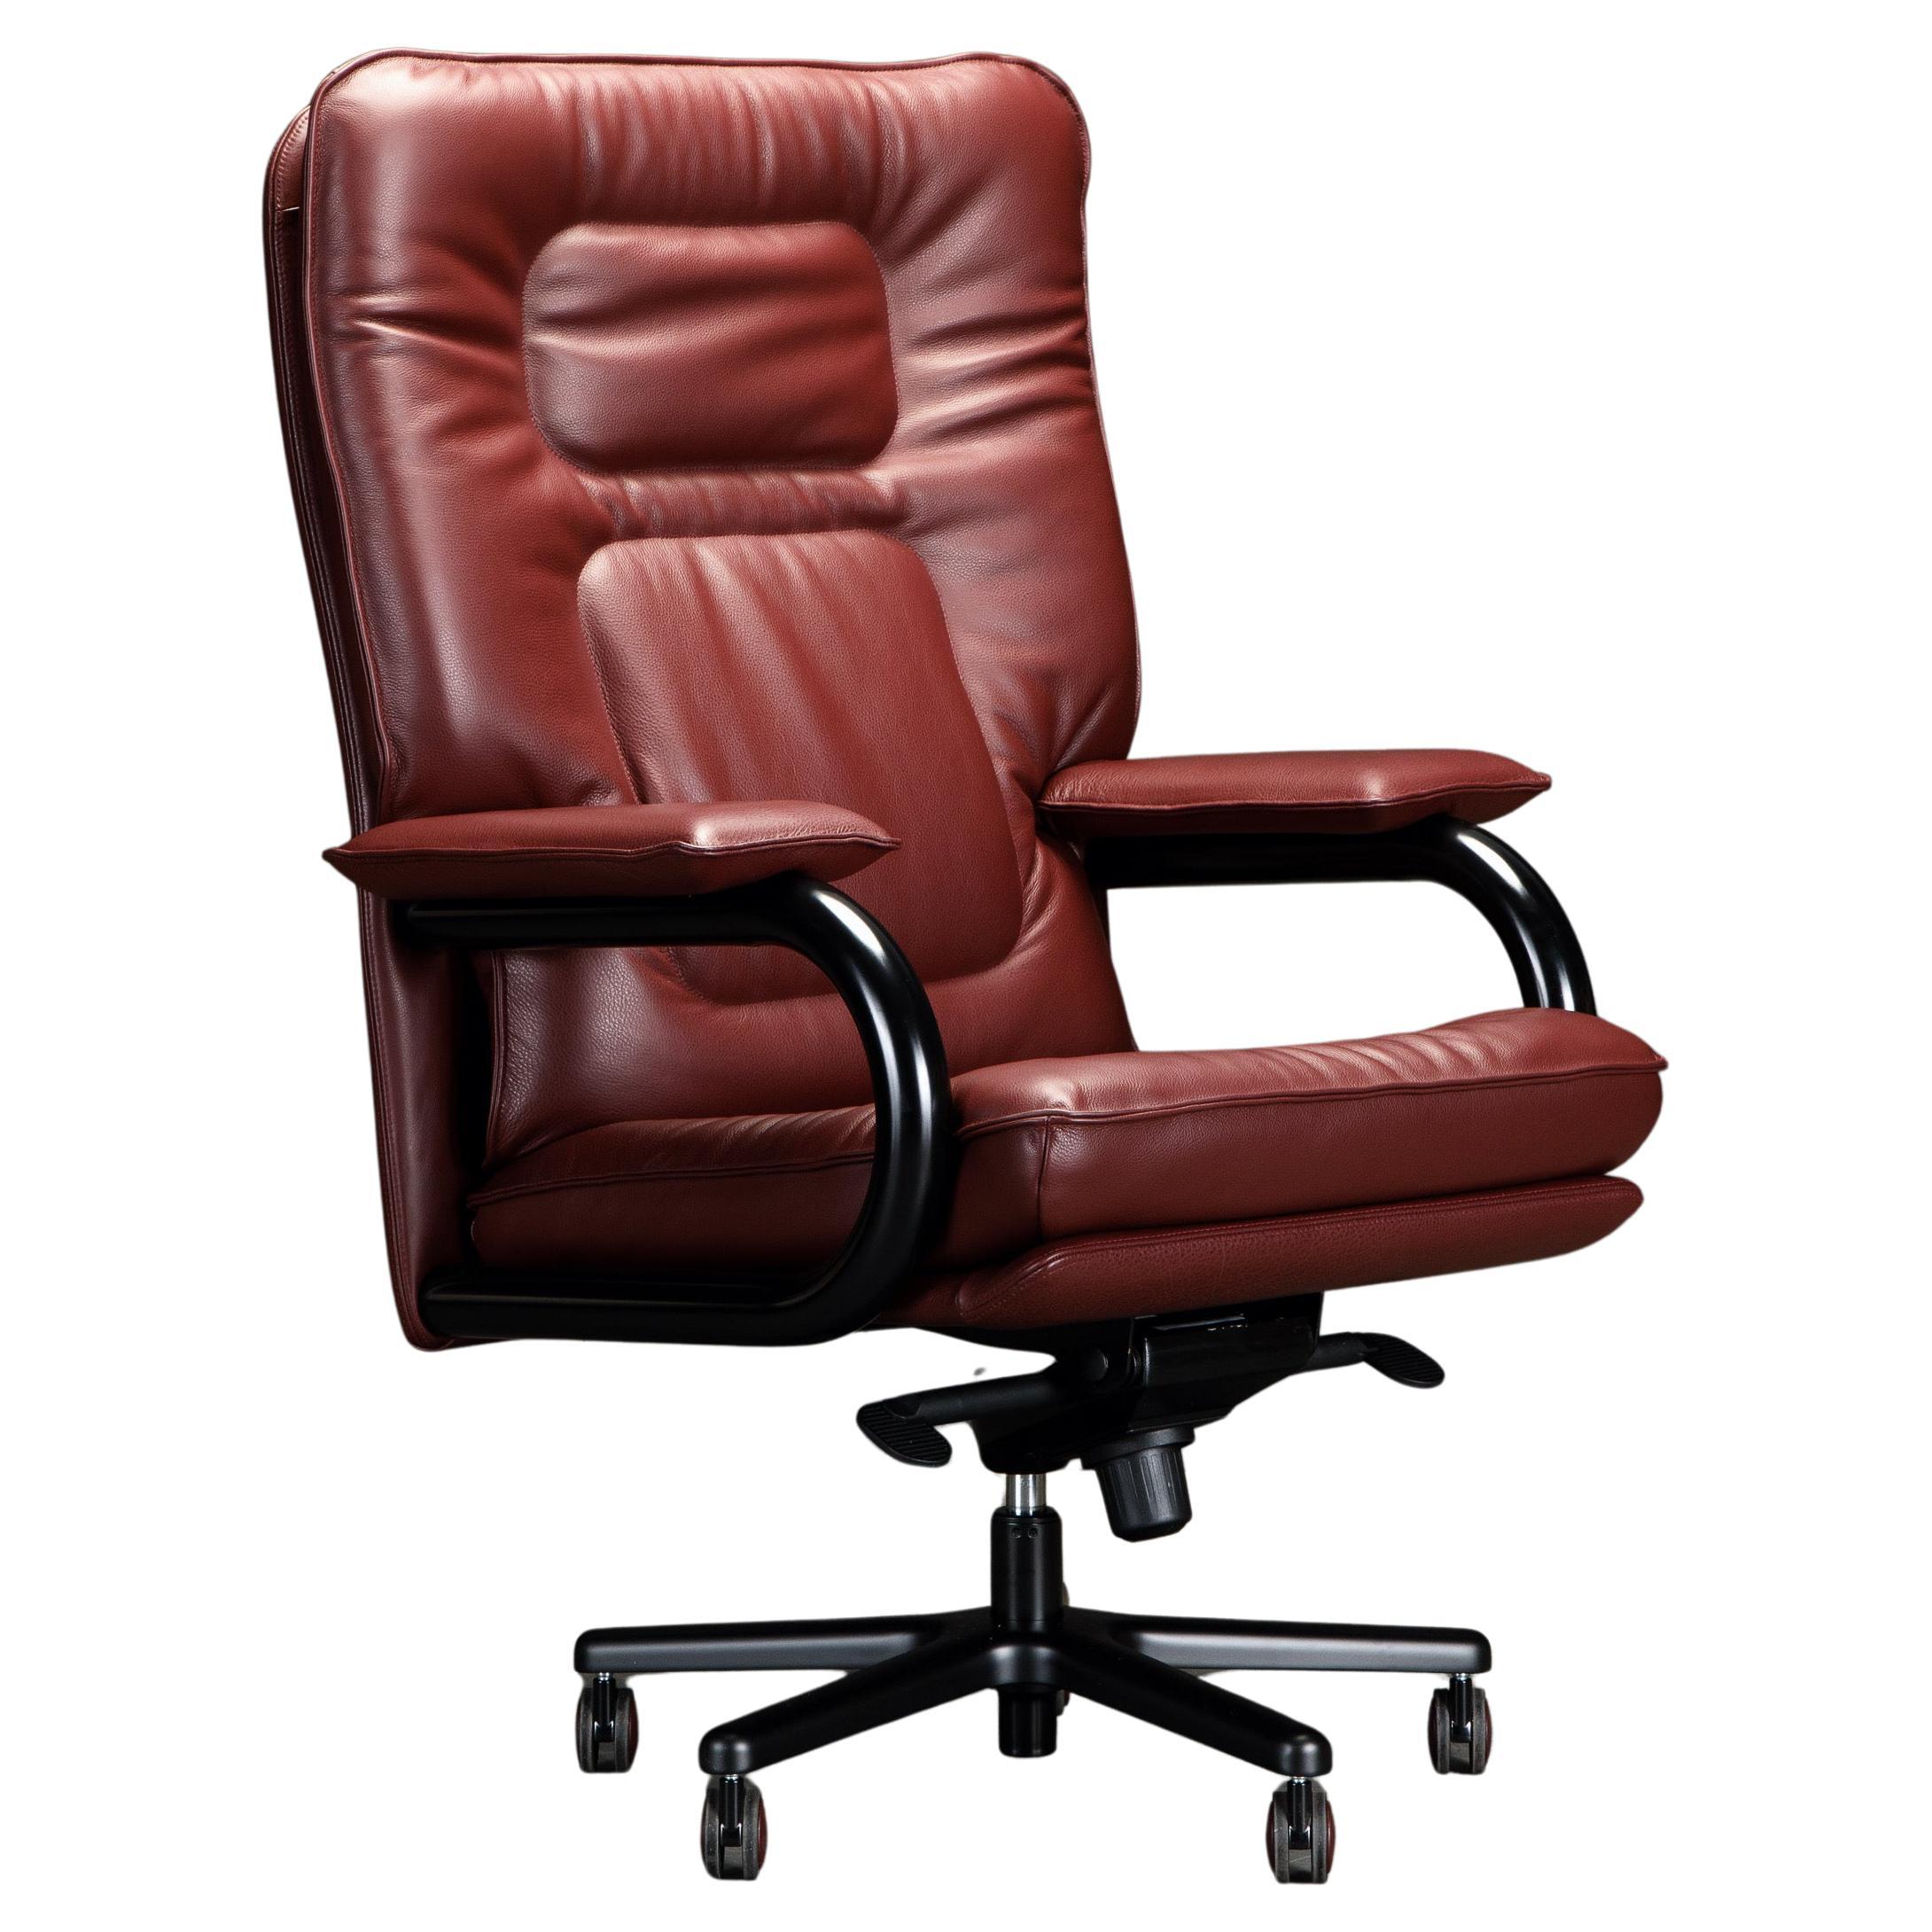 Pace Collection Swivel Chairs